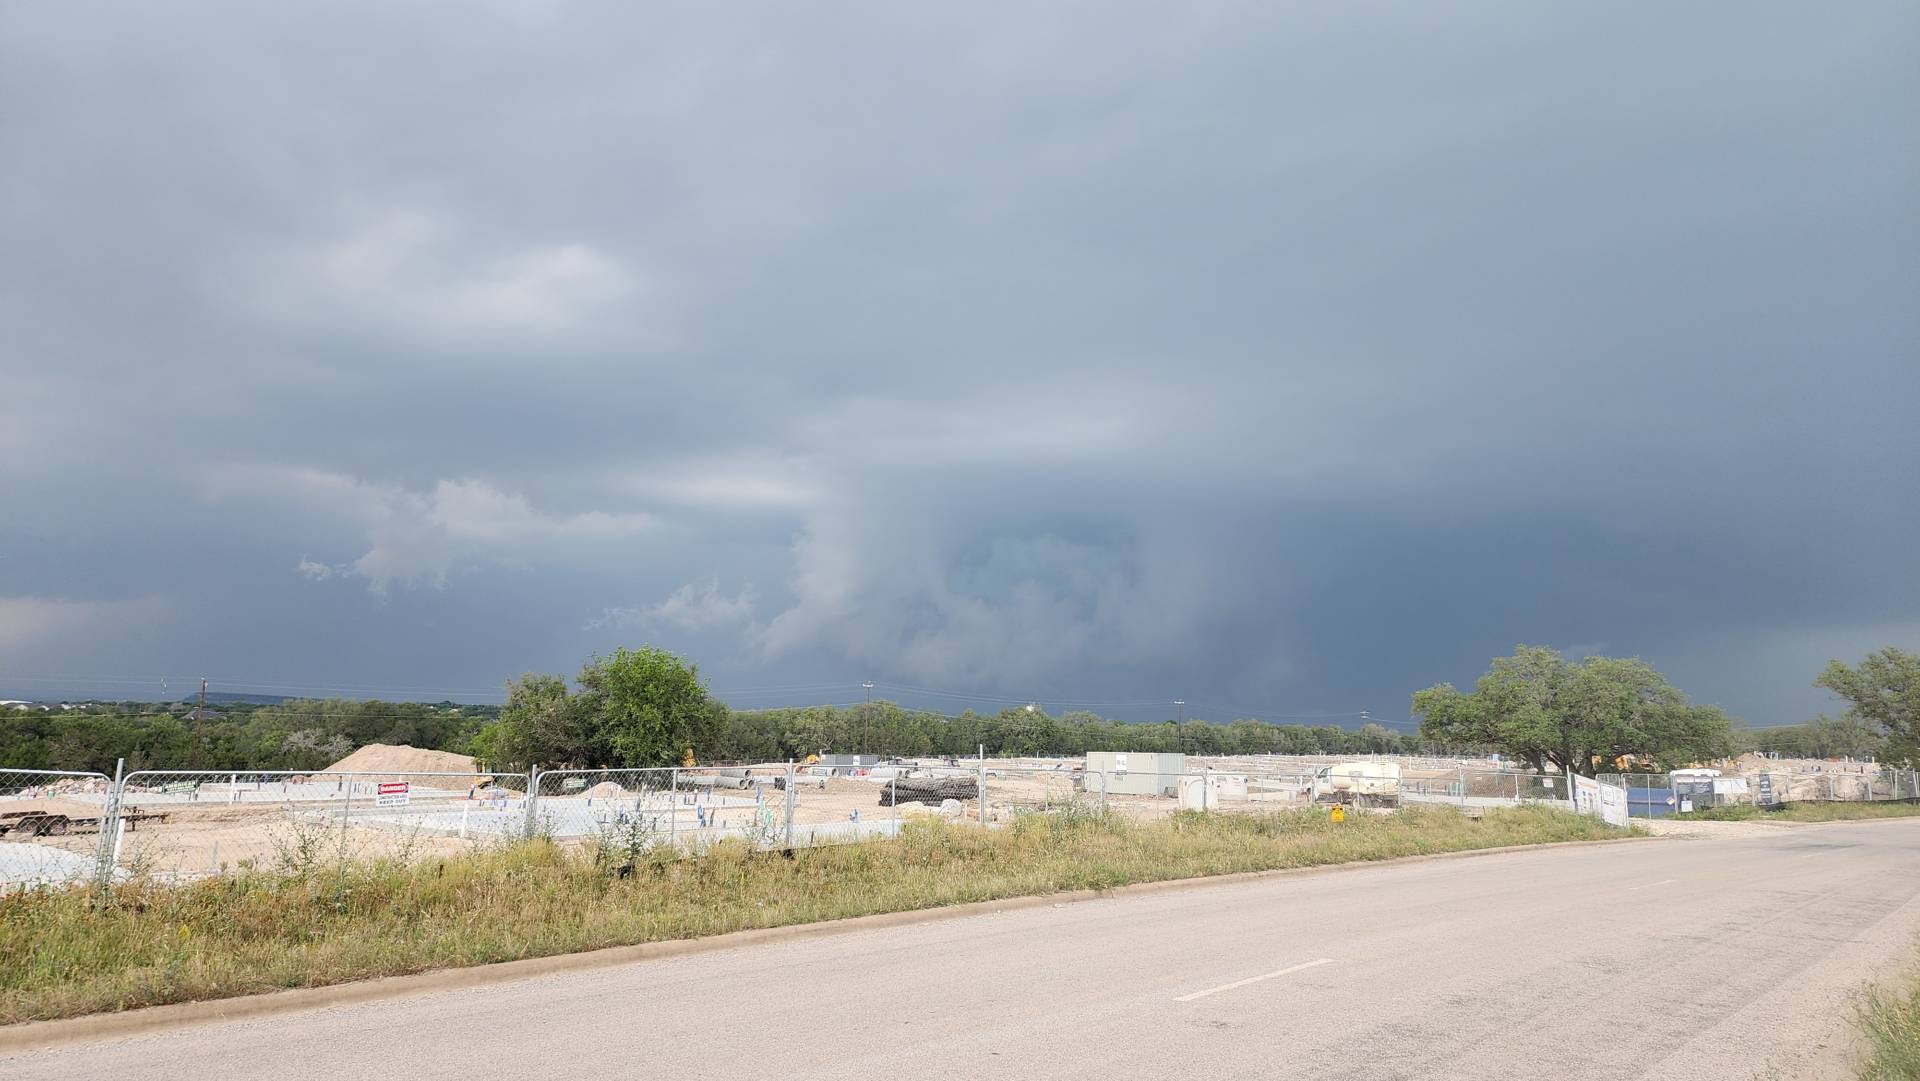 Ragged wall cloud forming NW of Marble Falls, Texas 07:01 PM #txwx